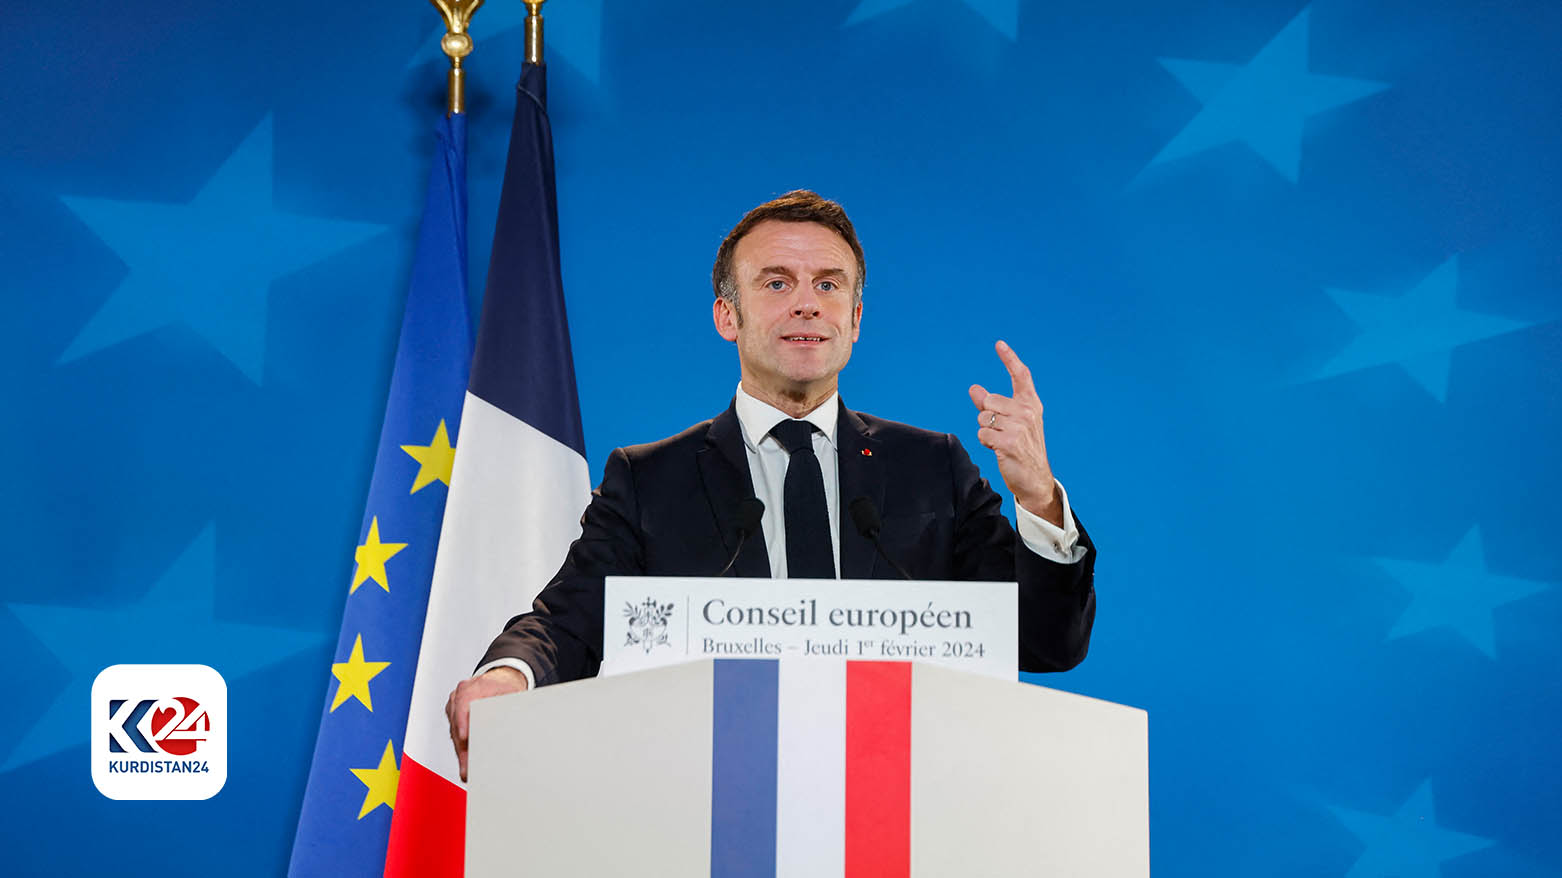 France's President Emmanuel Macron gestures as he addresses the audience during a press conference as part of a European Council meeting at the European headquarters in Brussels, Feb. 1, 2024. (Ludovic Marin/AFP)